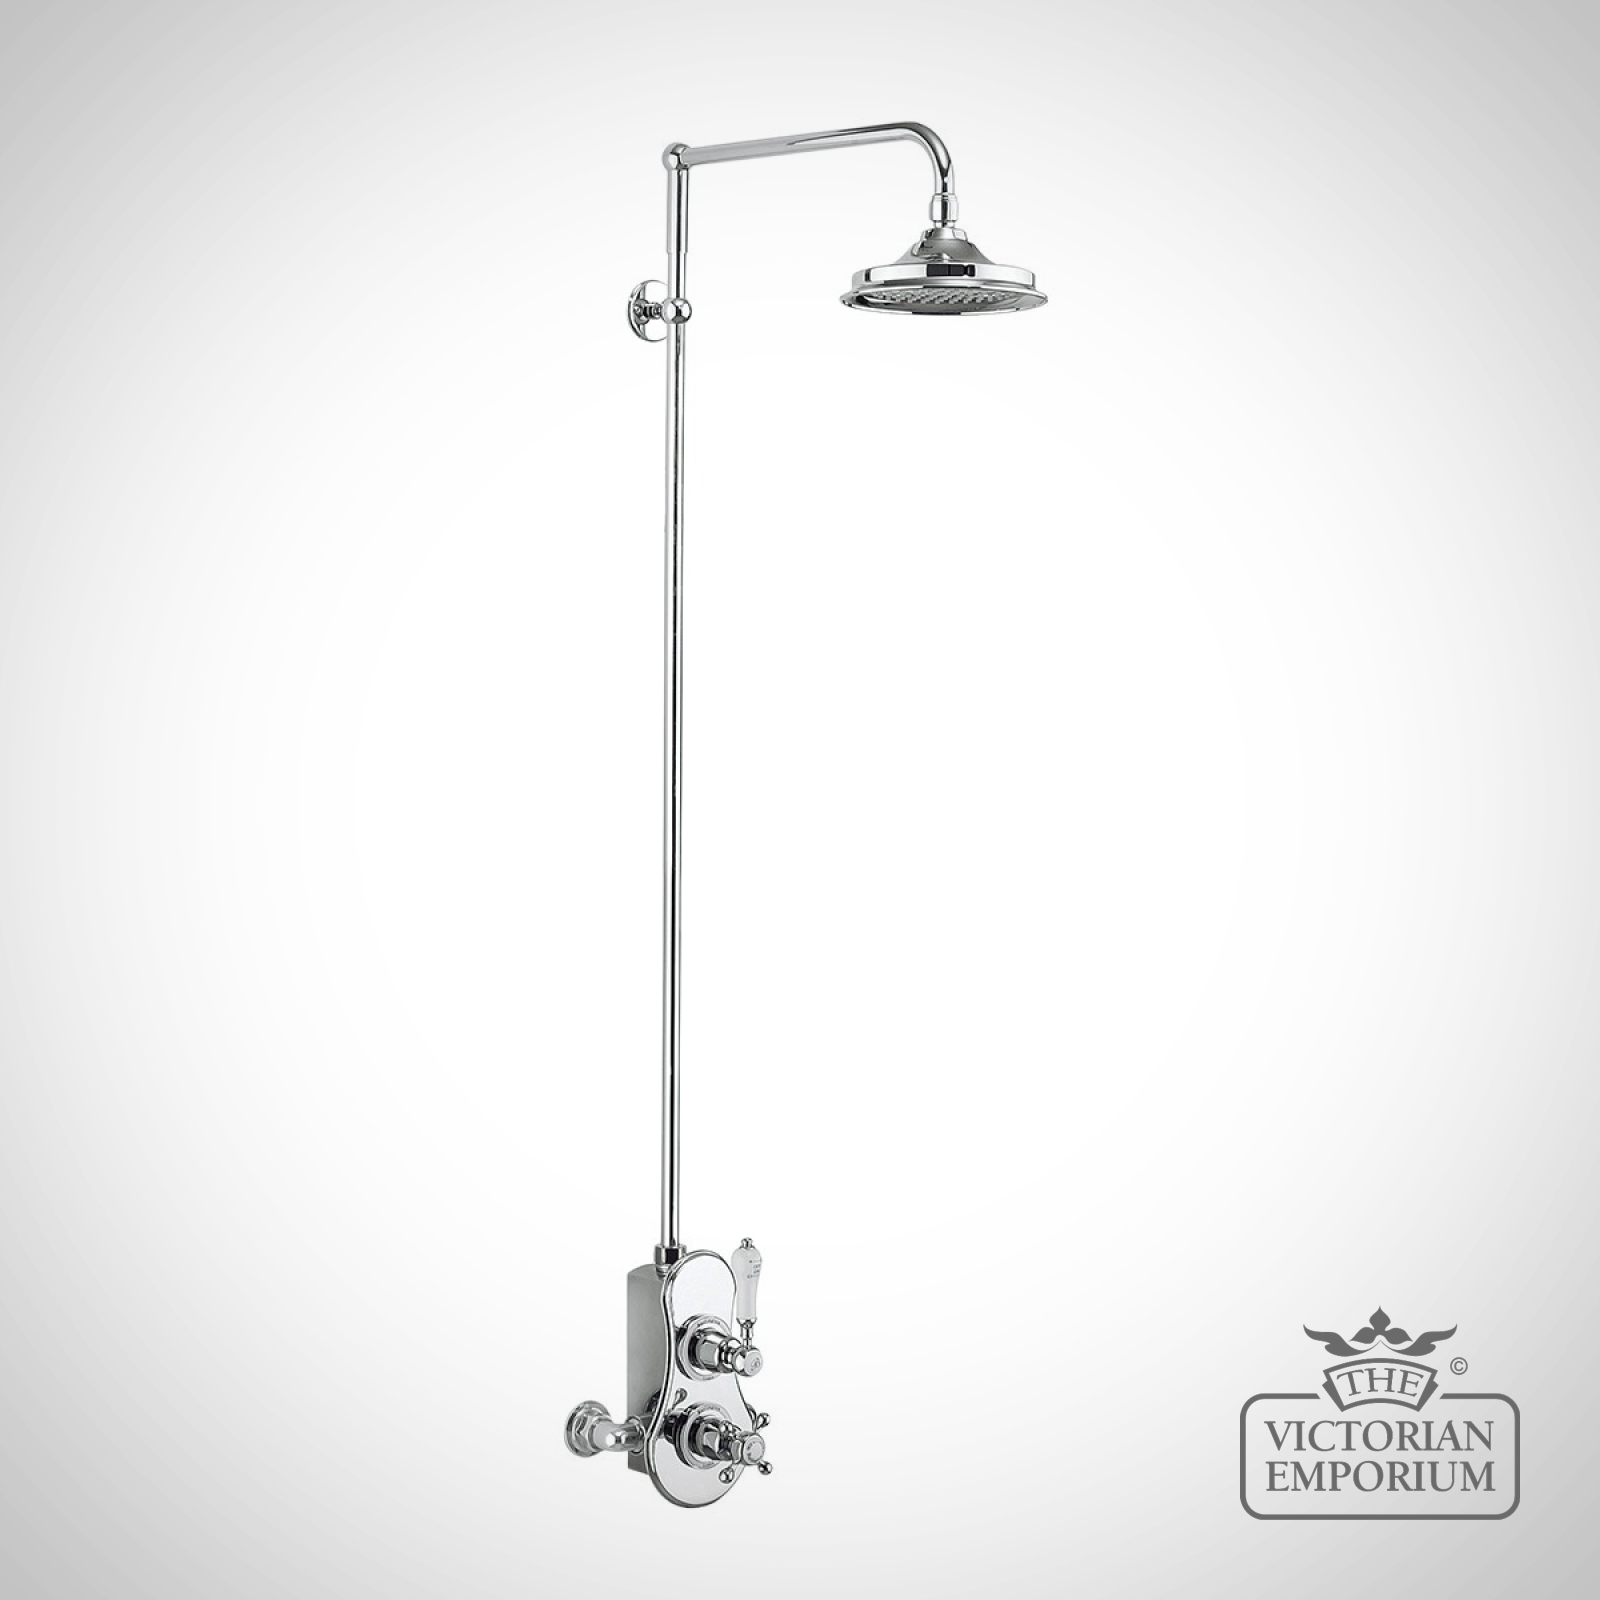 Speyside Thermostatic Exposed Shower Valve Single Outlet with Rigid Riser and Swivel Shower Arm